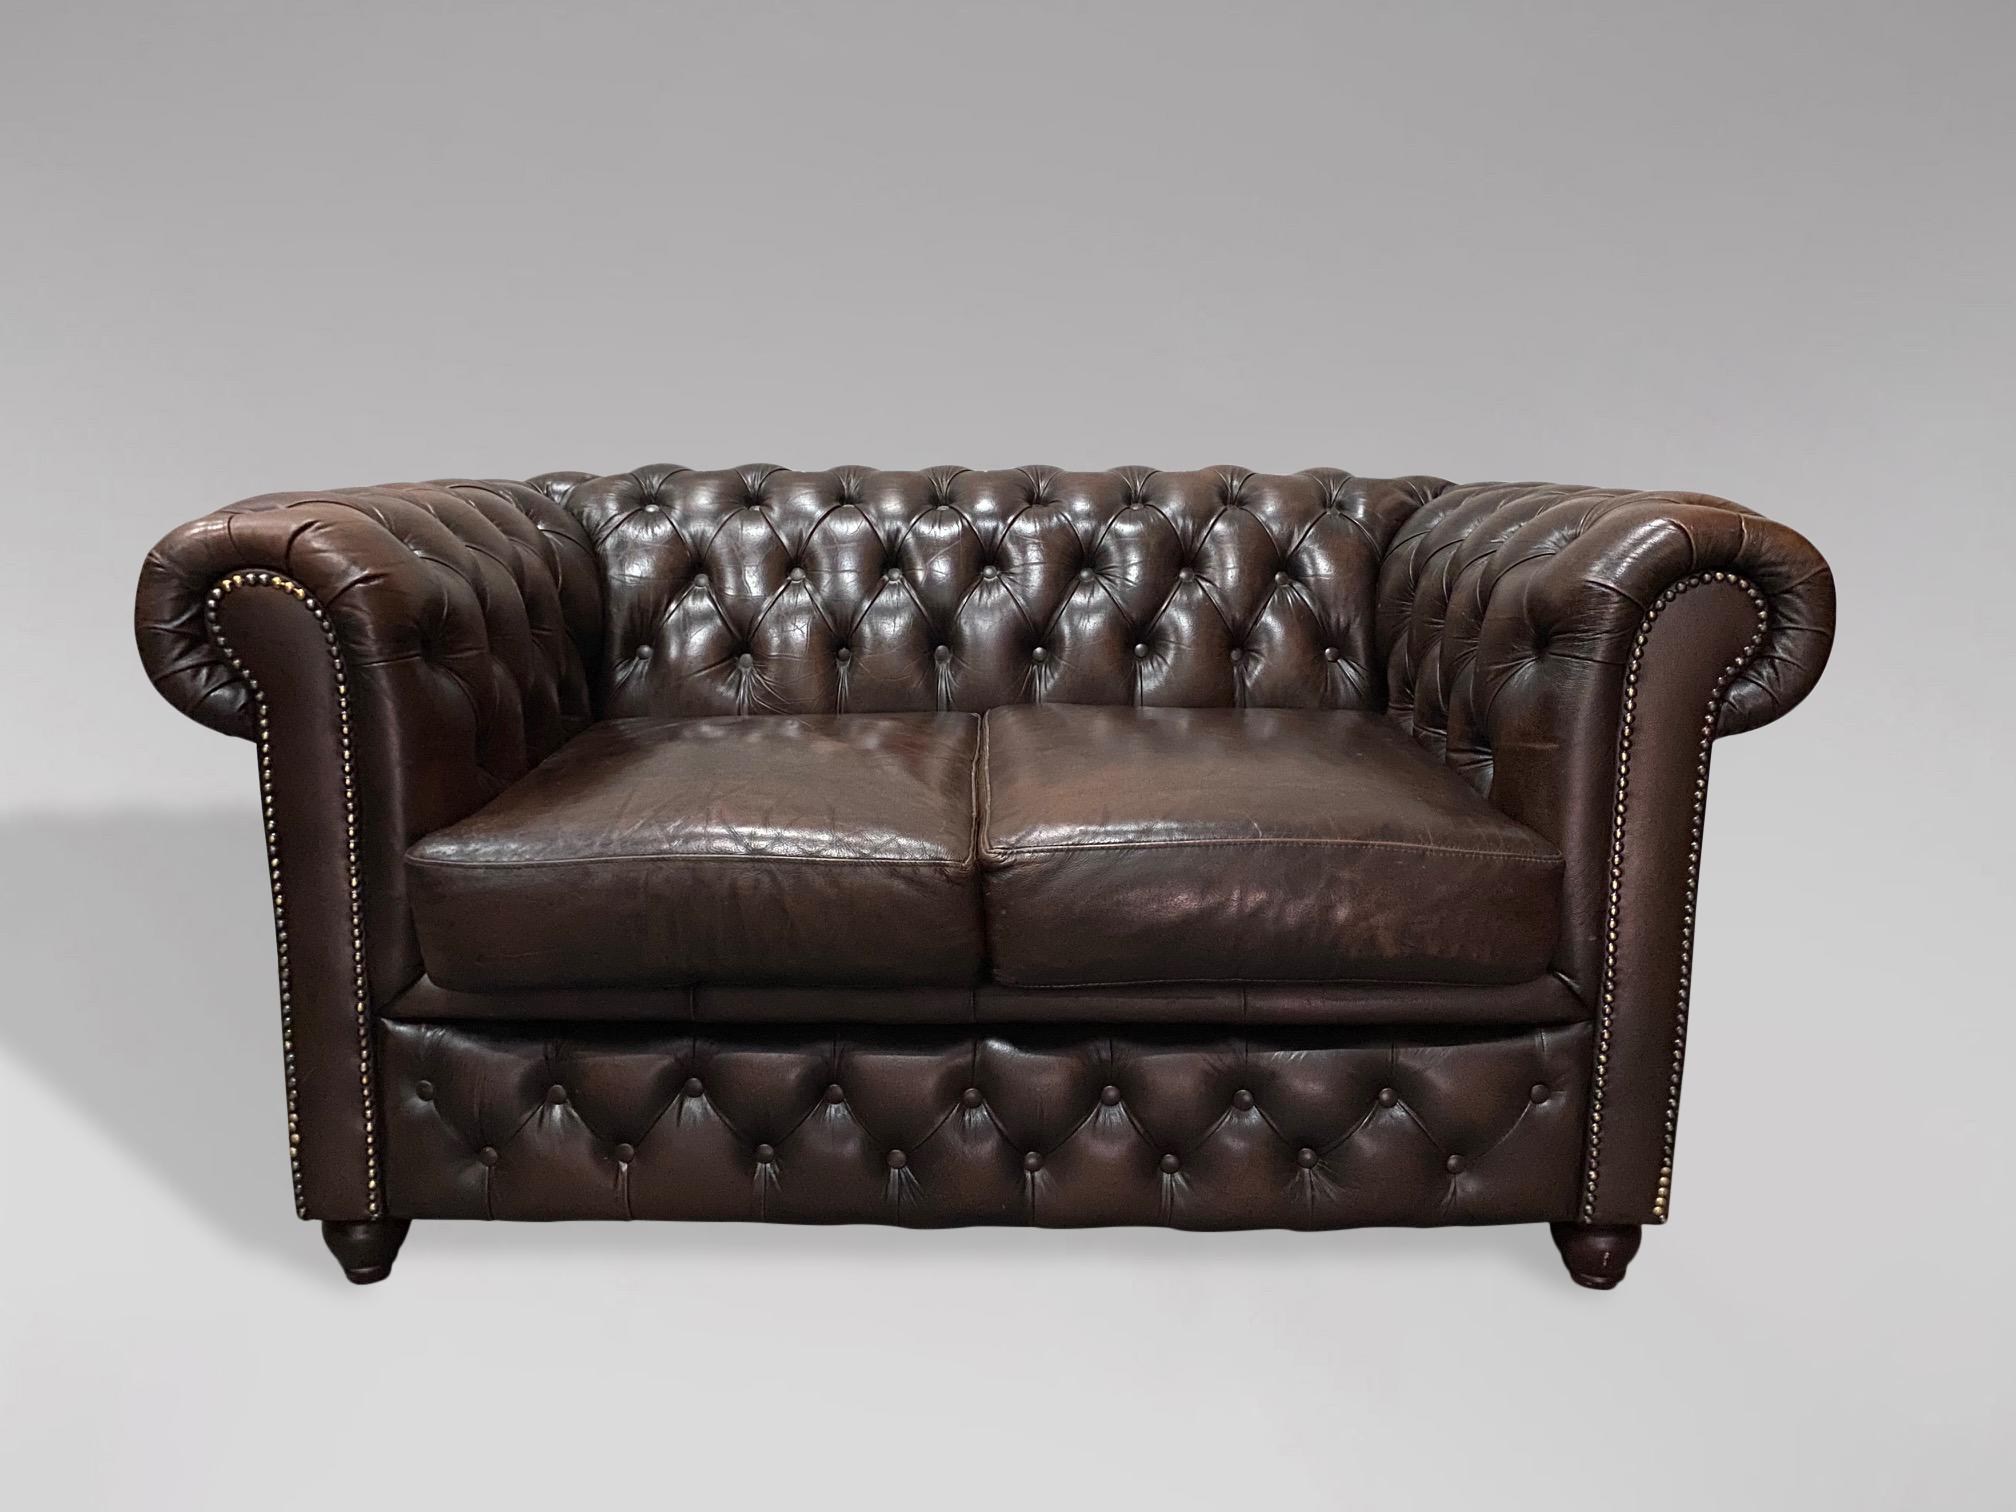 A 20th century large two seater vintage brown leather chesterfield with two large loose cushions, raised on 4 bun feet. A fine example of a good quality comfortable chesterfield. Very comfortable seating. A rather pleasing example.

The dimensions